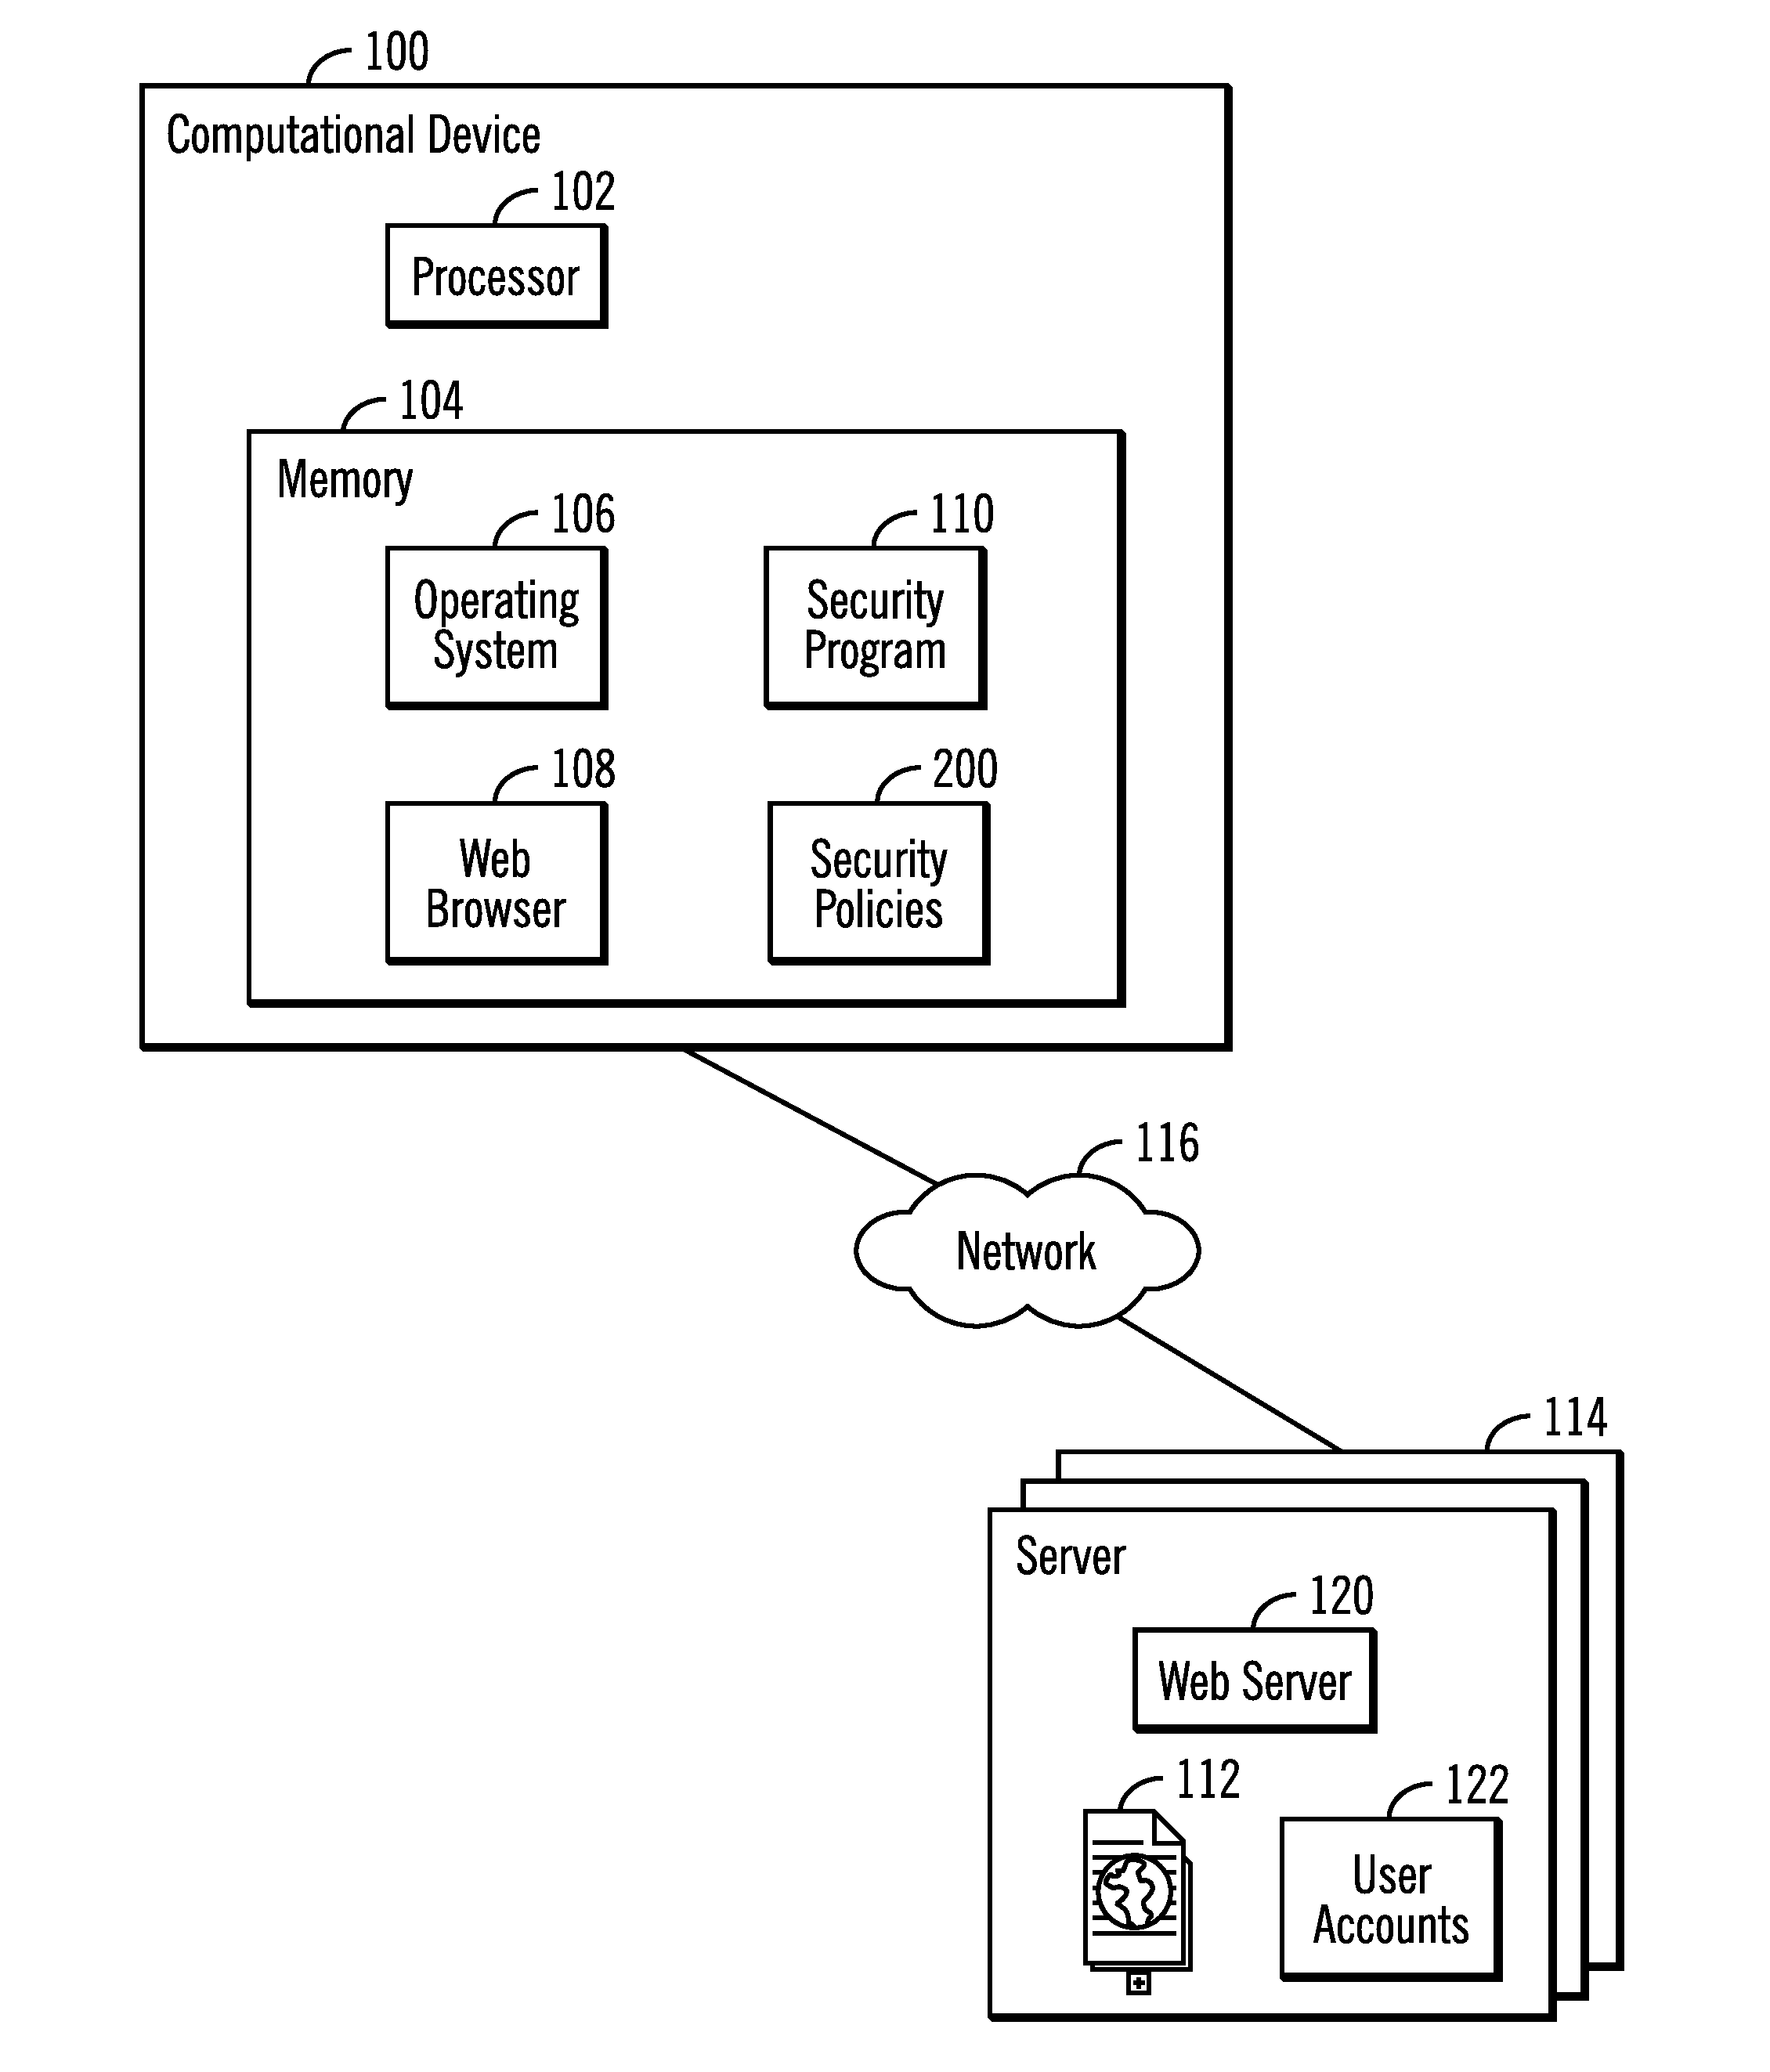 Interacting with a remote server over a network to determine whether to allow data exchange with a resource at the remote server